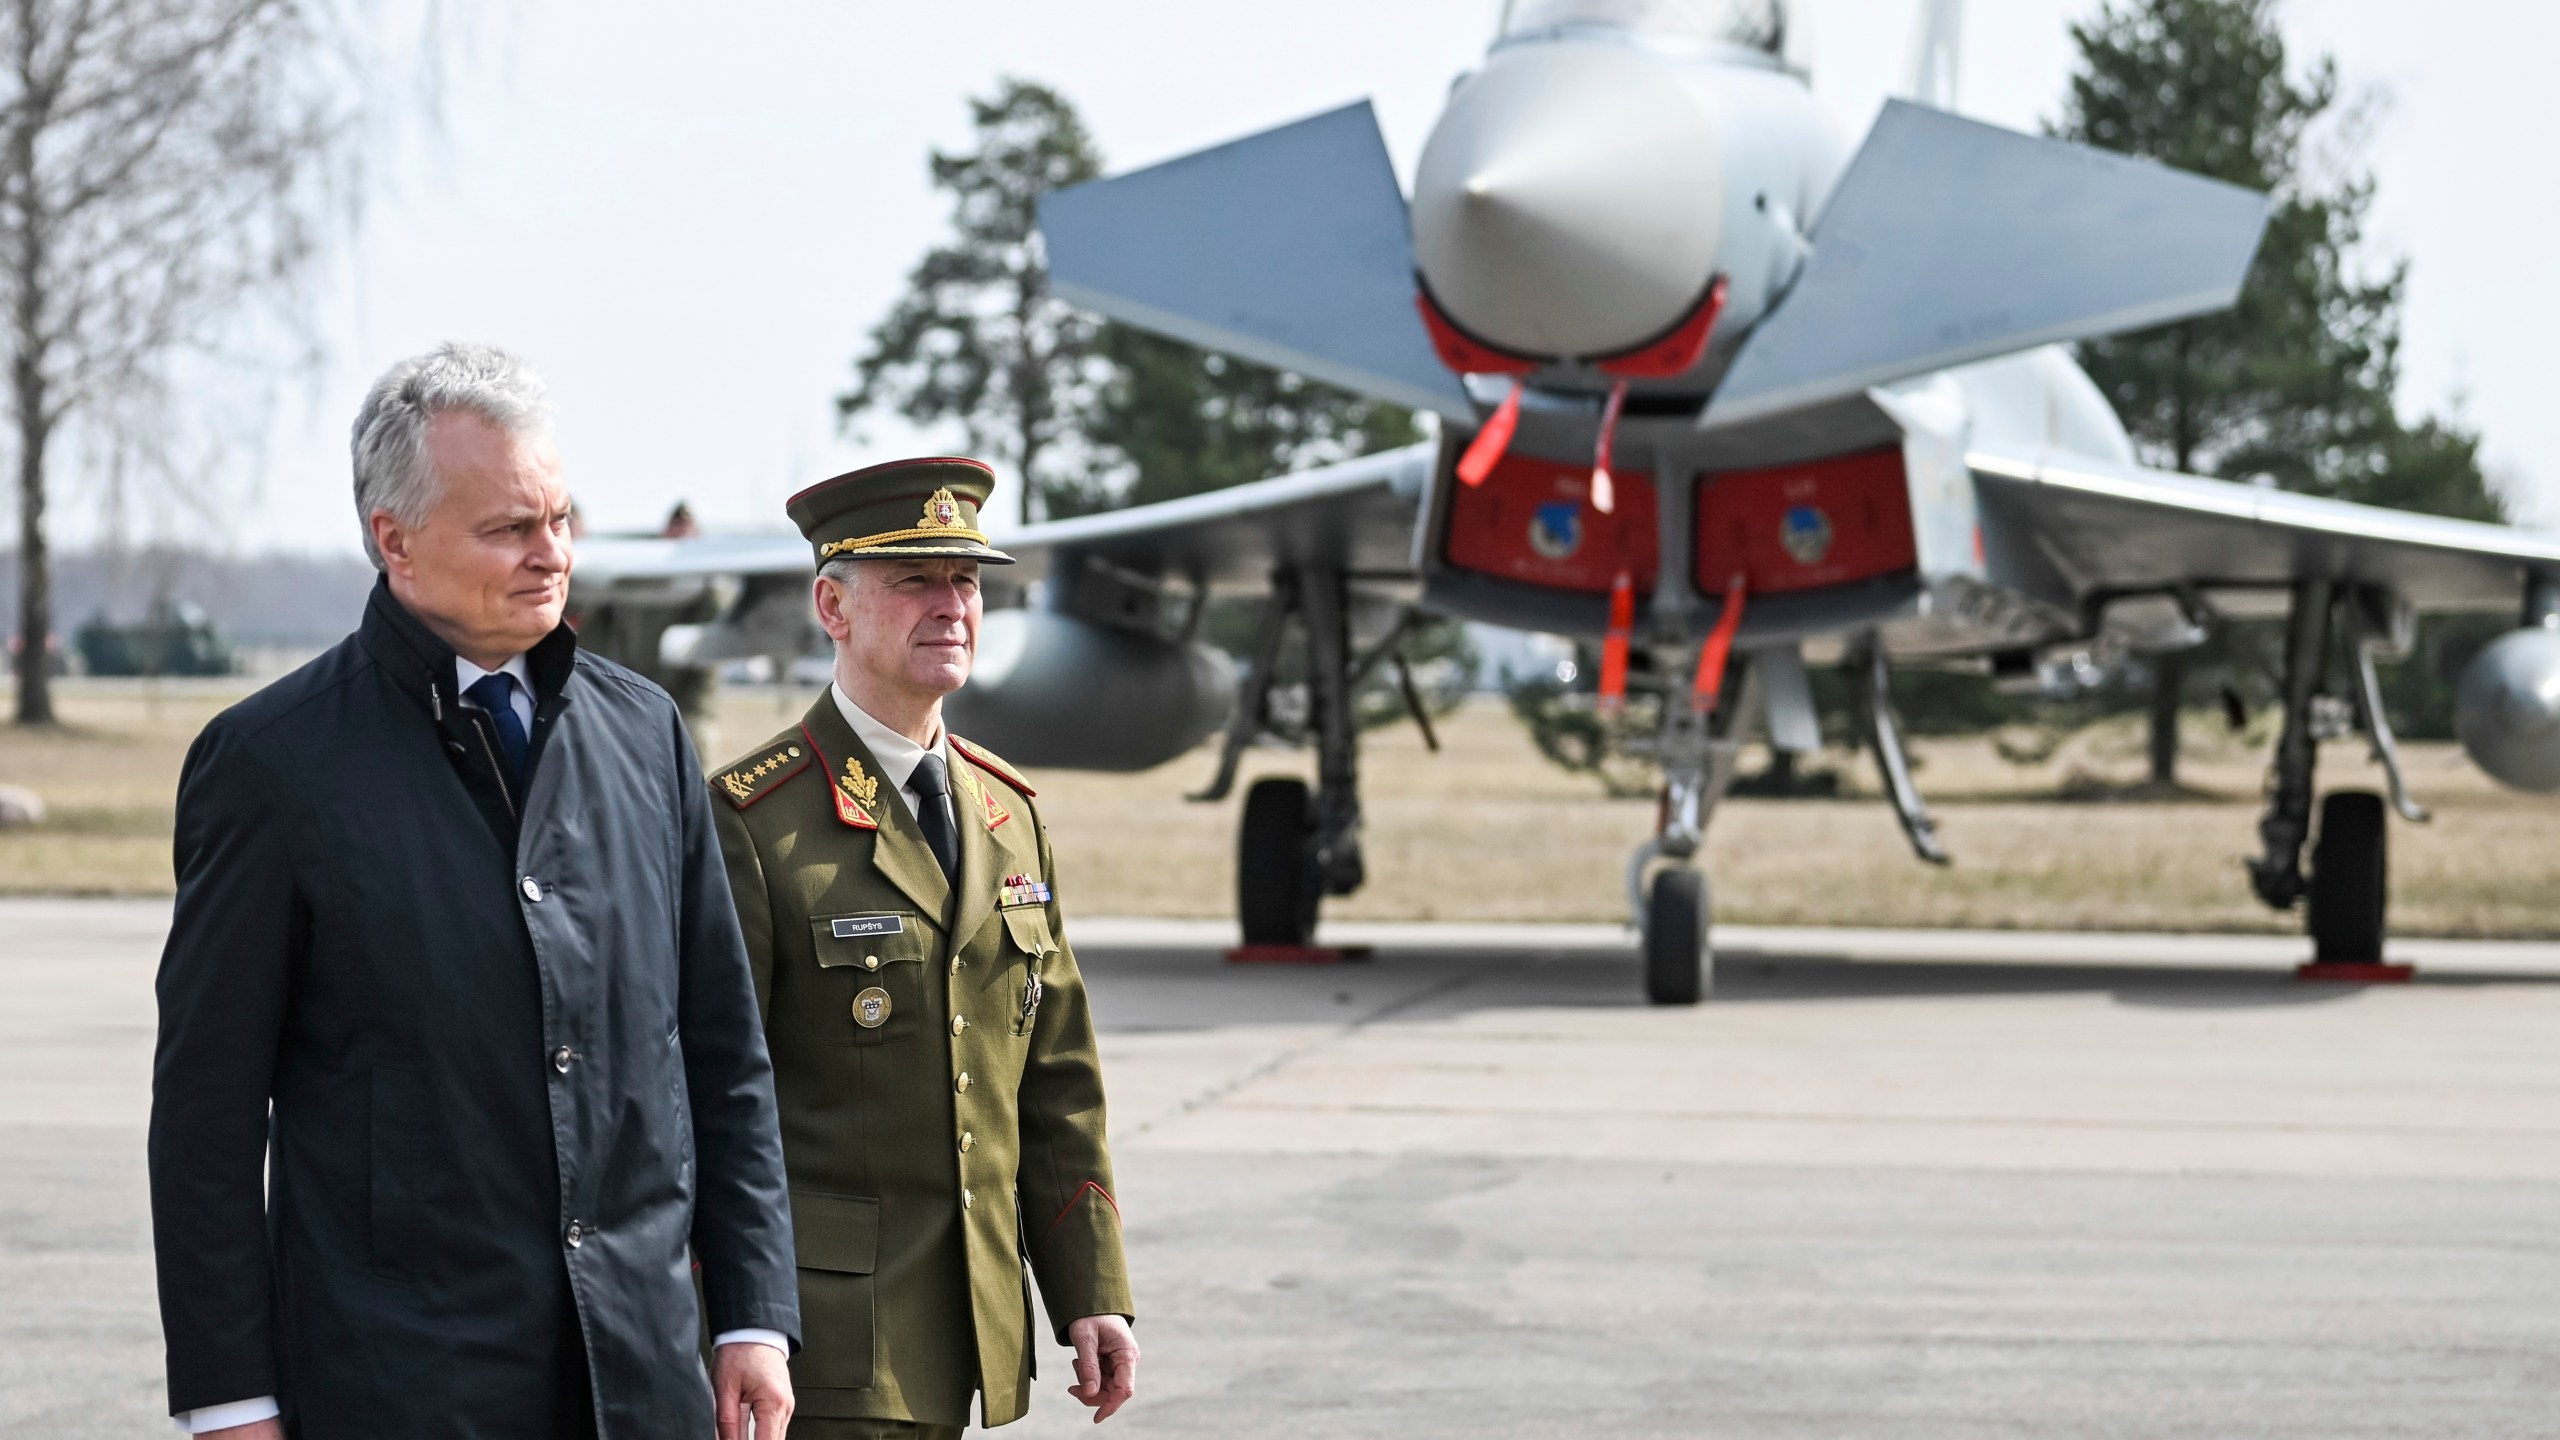 In this photo provided by Lithuanian Ministry of National Defense, Lithuania's Presiodent Gitanas Nauseda , left, and Chief of Defence of Lithuania Gen Valdemaras Rupsys arrive for celebration Lithuania's NATO membership 20th anniversary at the Siauliai airbase, some 230 km (144 miles) east of the capital Vilnius, Lithuania, Thursday, March 28, 2024. (Alfredas Pliadis/Lithuanian Ministry of National Defense via AP)